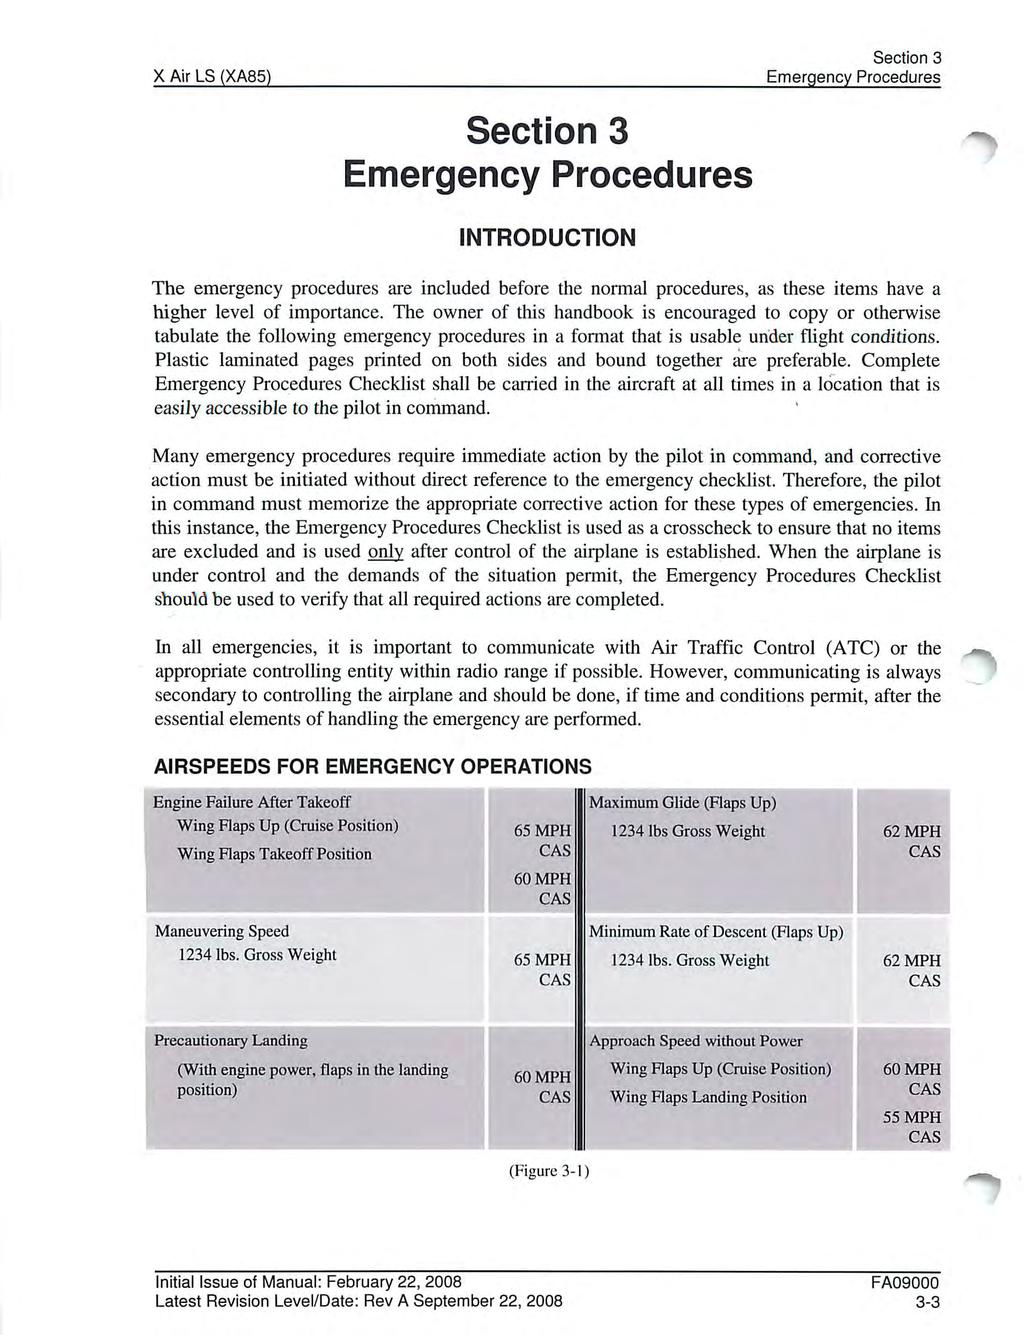 X Air LS (XA85) Section 3 Emergency Procedures Section 3 Emergency Procedures INTRODUCTION The emergency procedures are included before the normal procedures, as these items have a higher level of